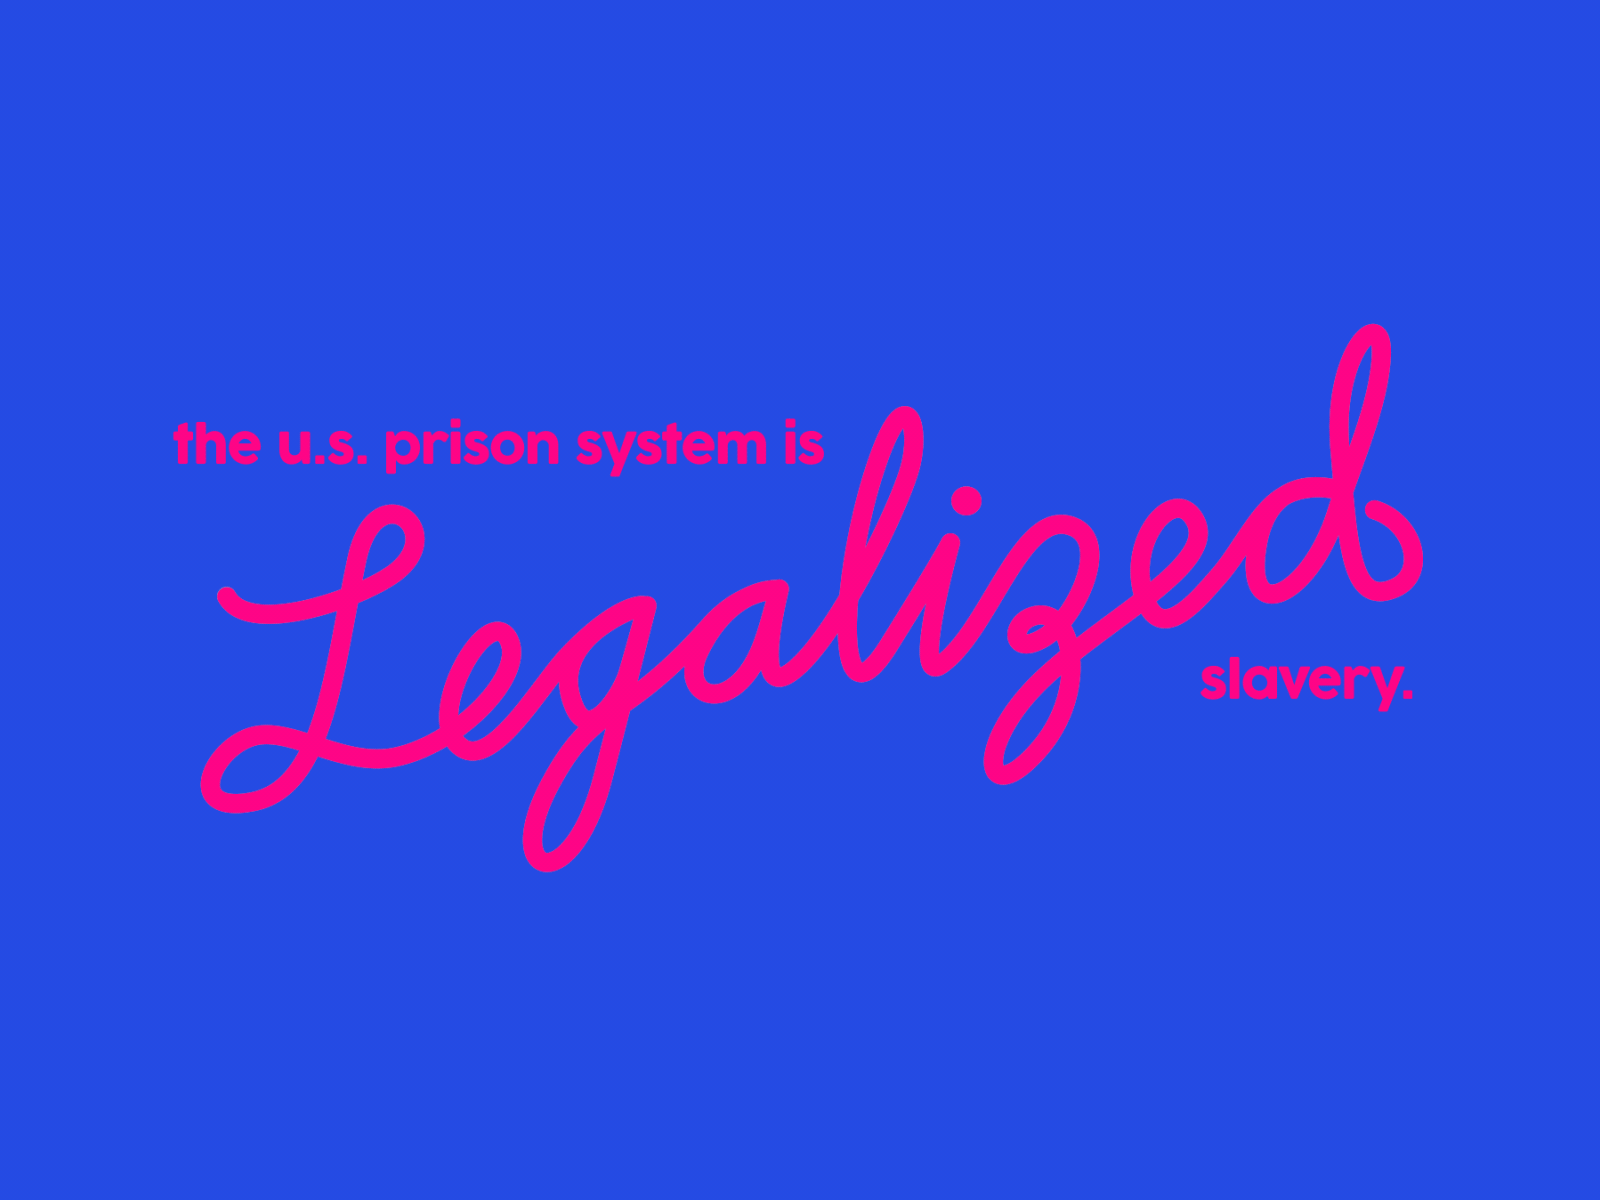 The U.S. Prison System is Legalized Slavery. animation political typography